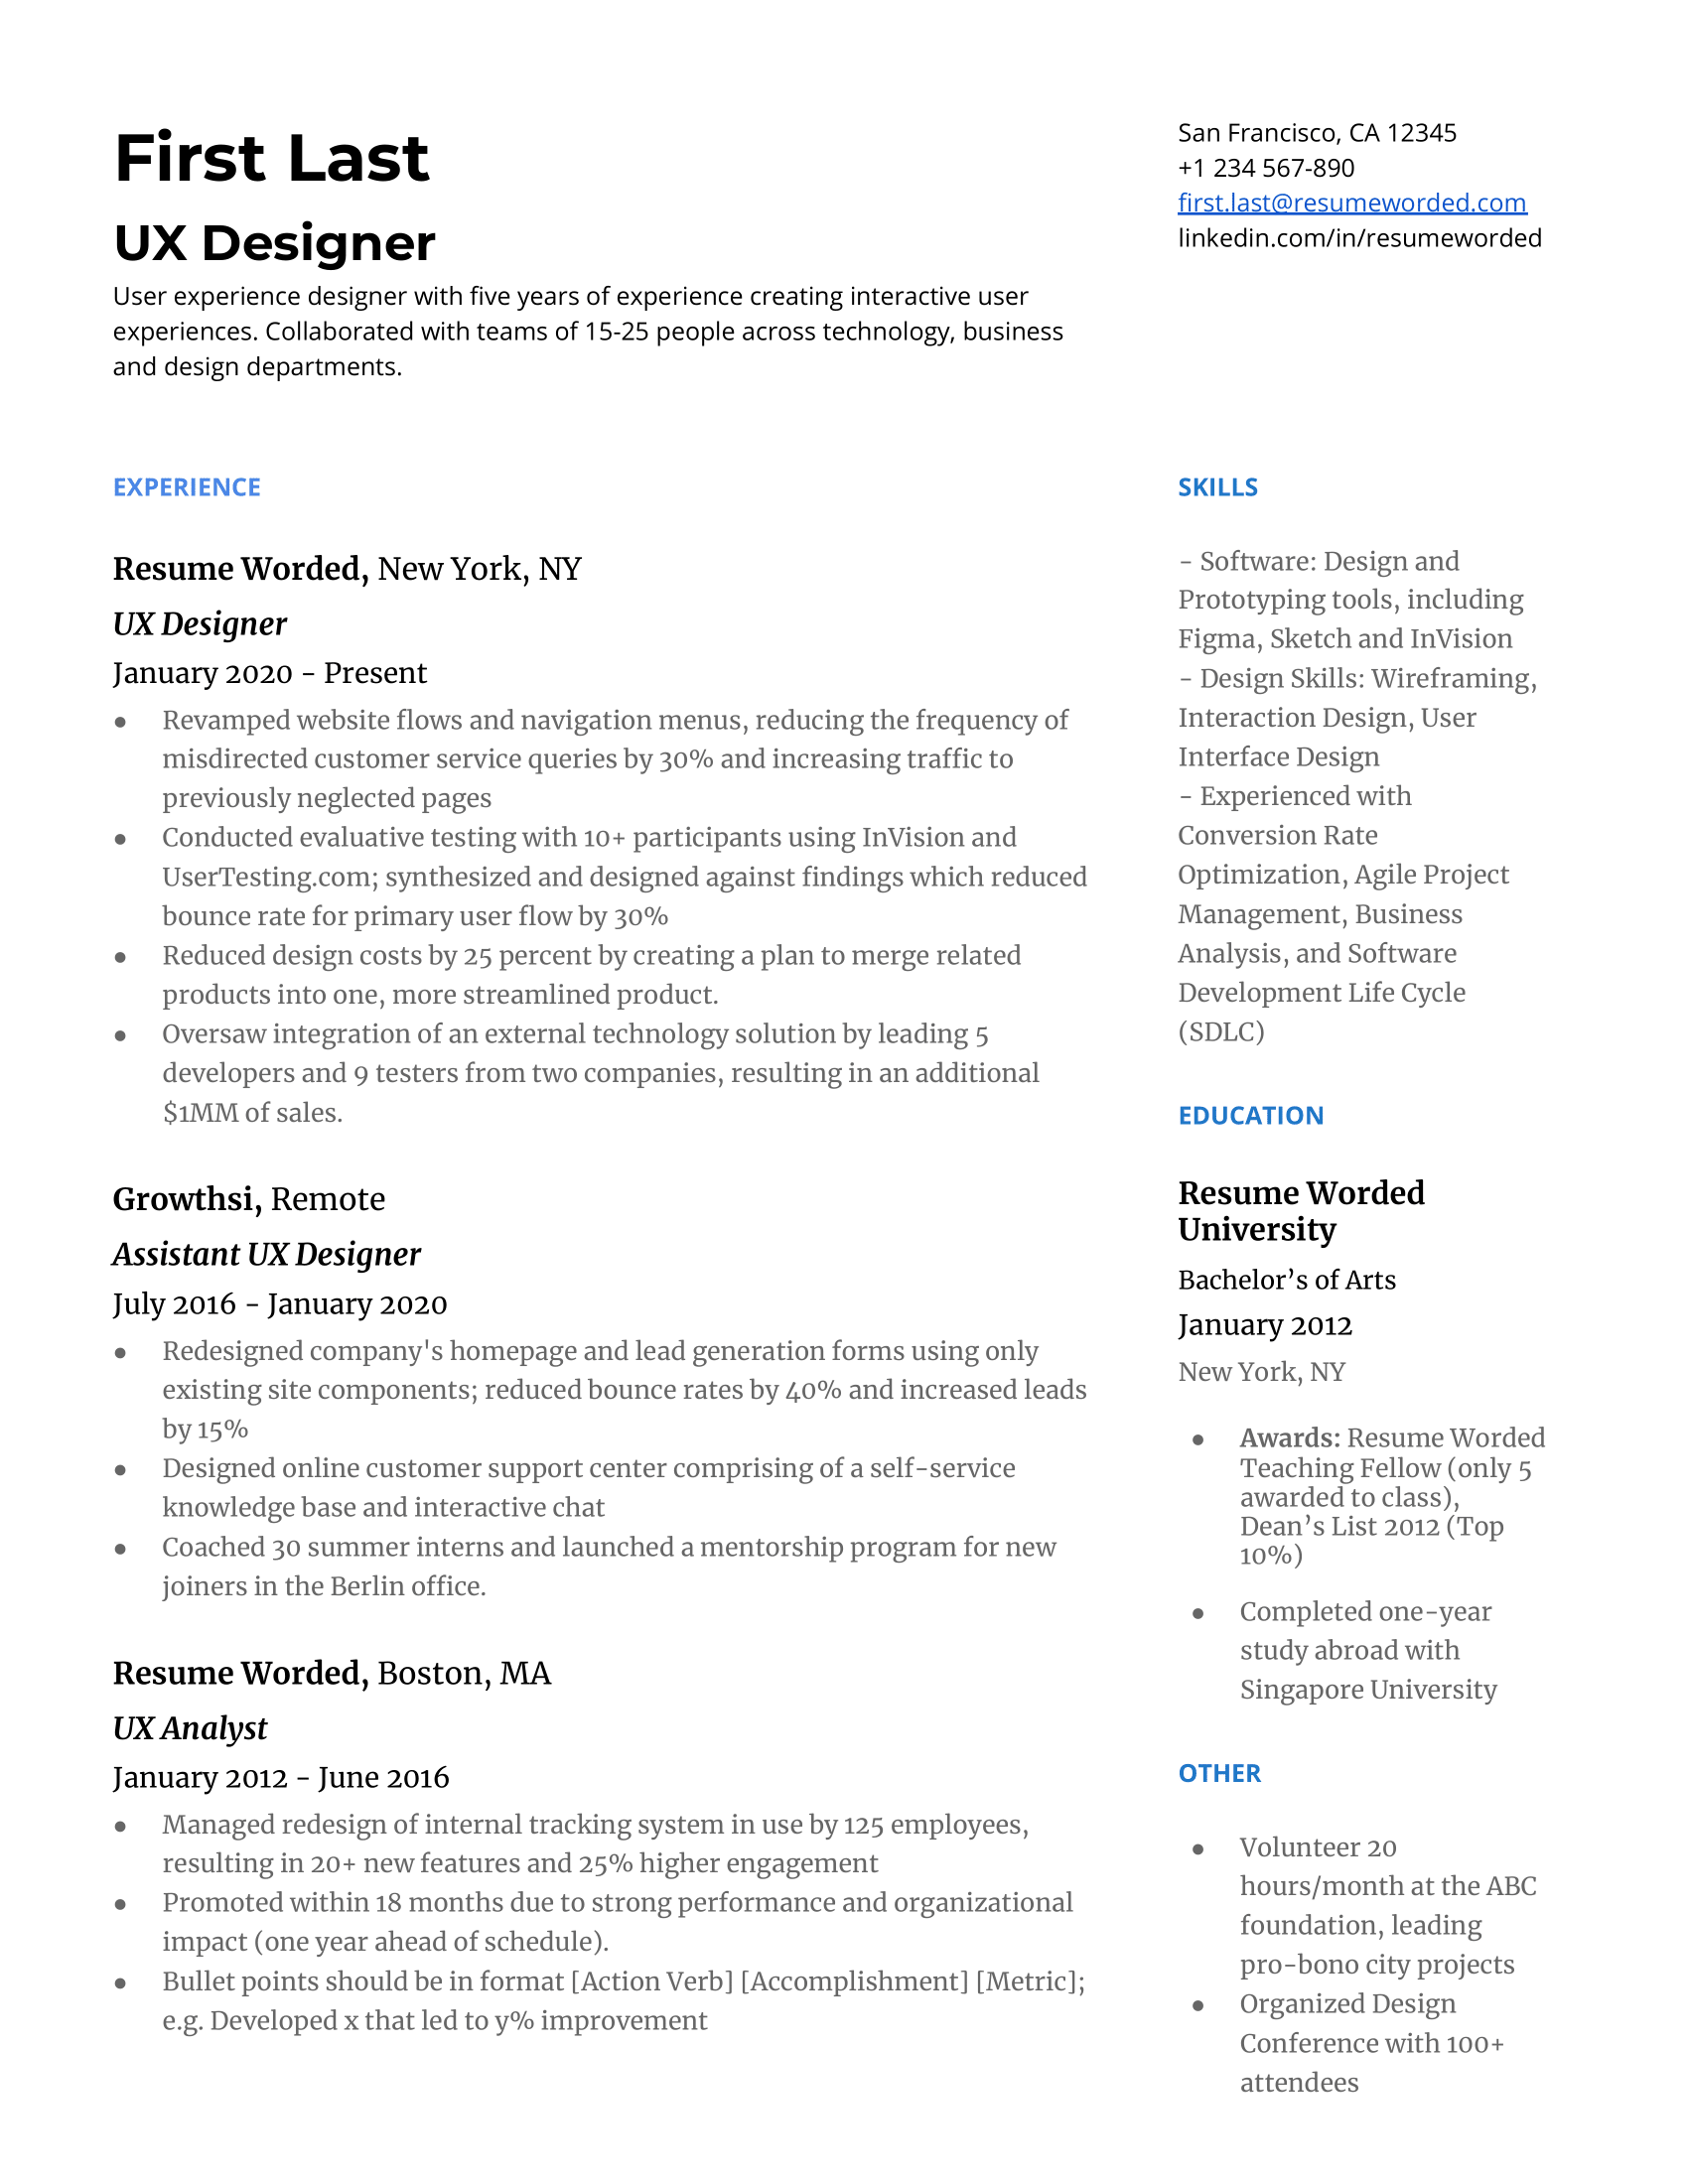 A well-structured CV for a UX designer position, showcasing problem-solving skills and proficiency in popular design tools.